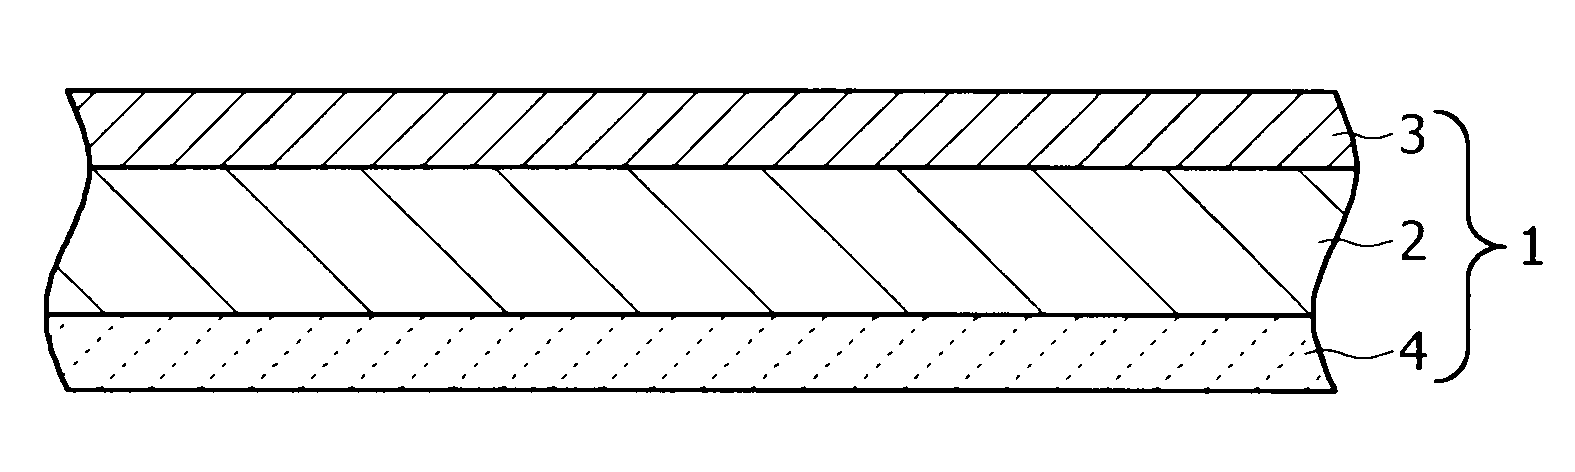 Aluminum alloy clad sheet for a heat exchanger and its production method